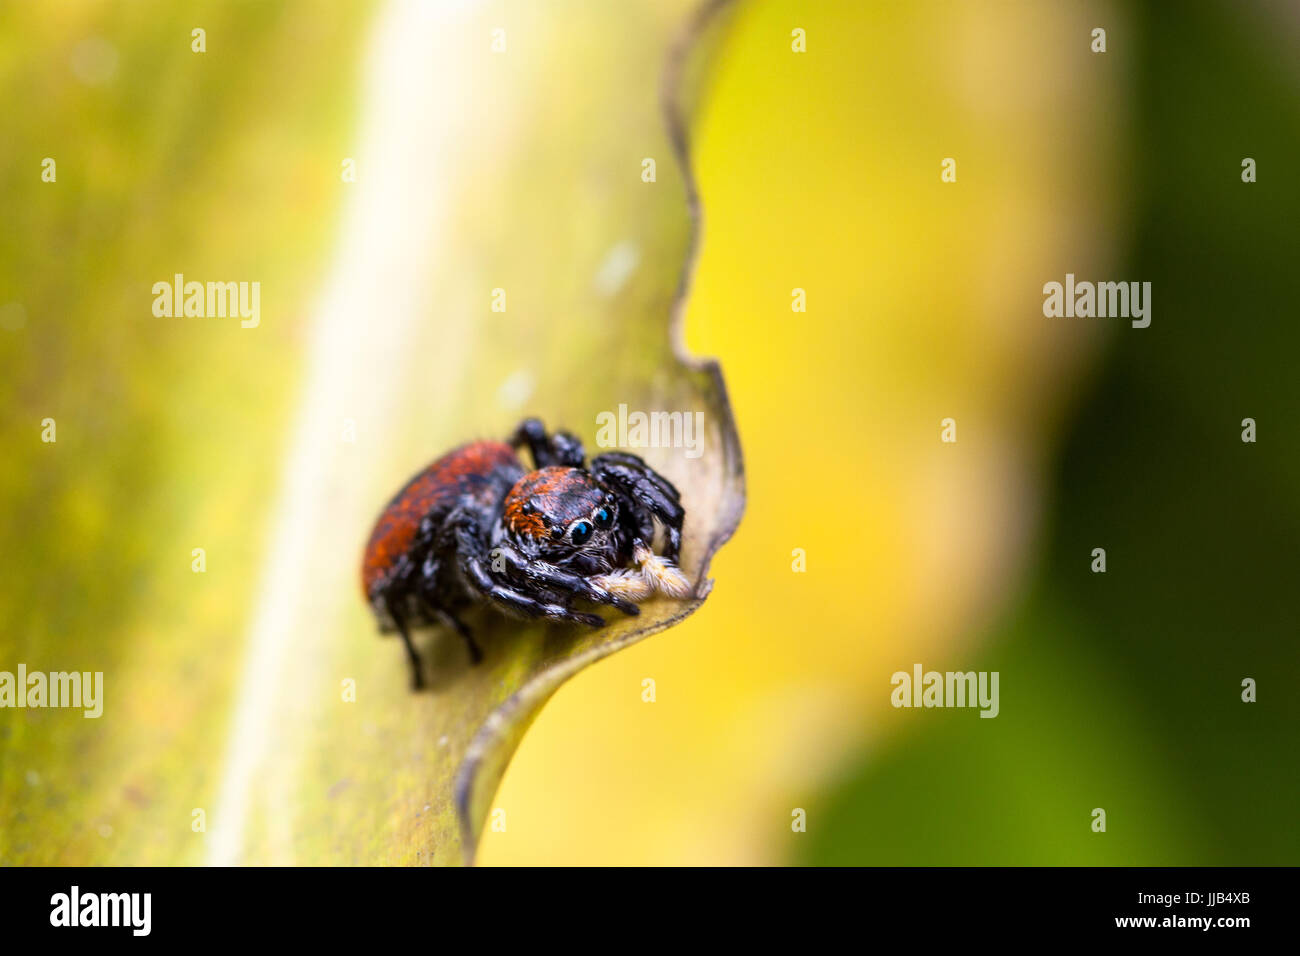 Small red and black jumping spider sitting on a yellow leaf with green and yellow background close-up photo Stock Photo